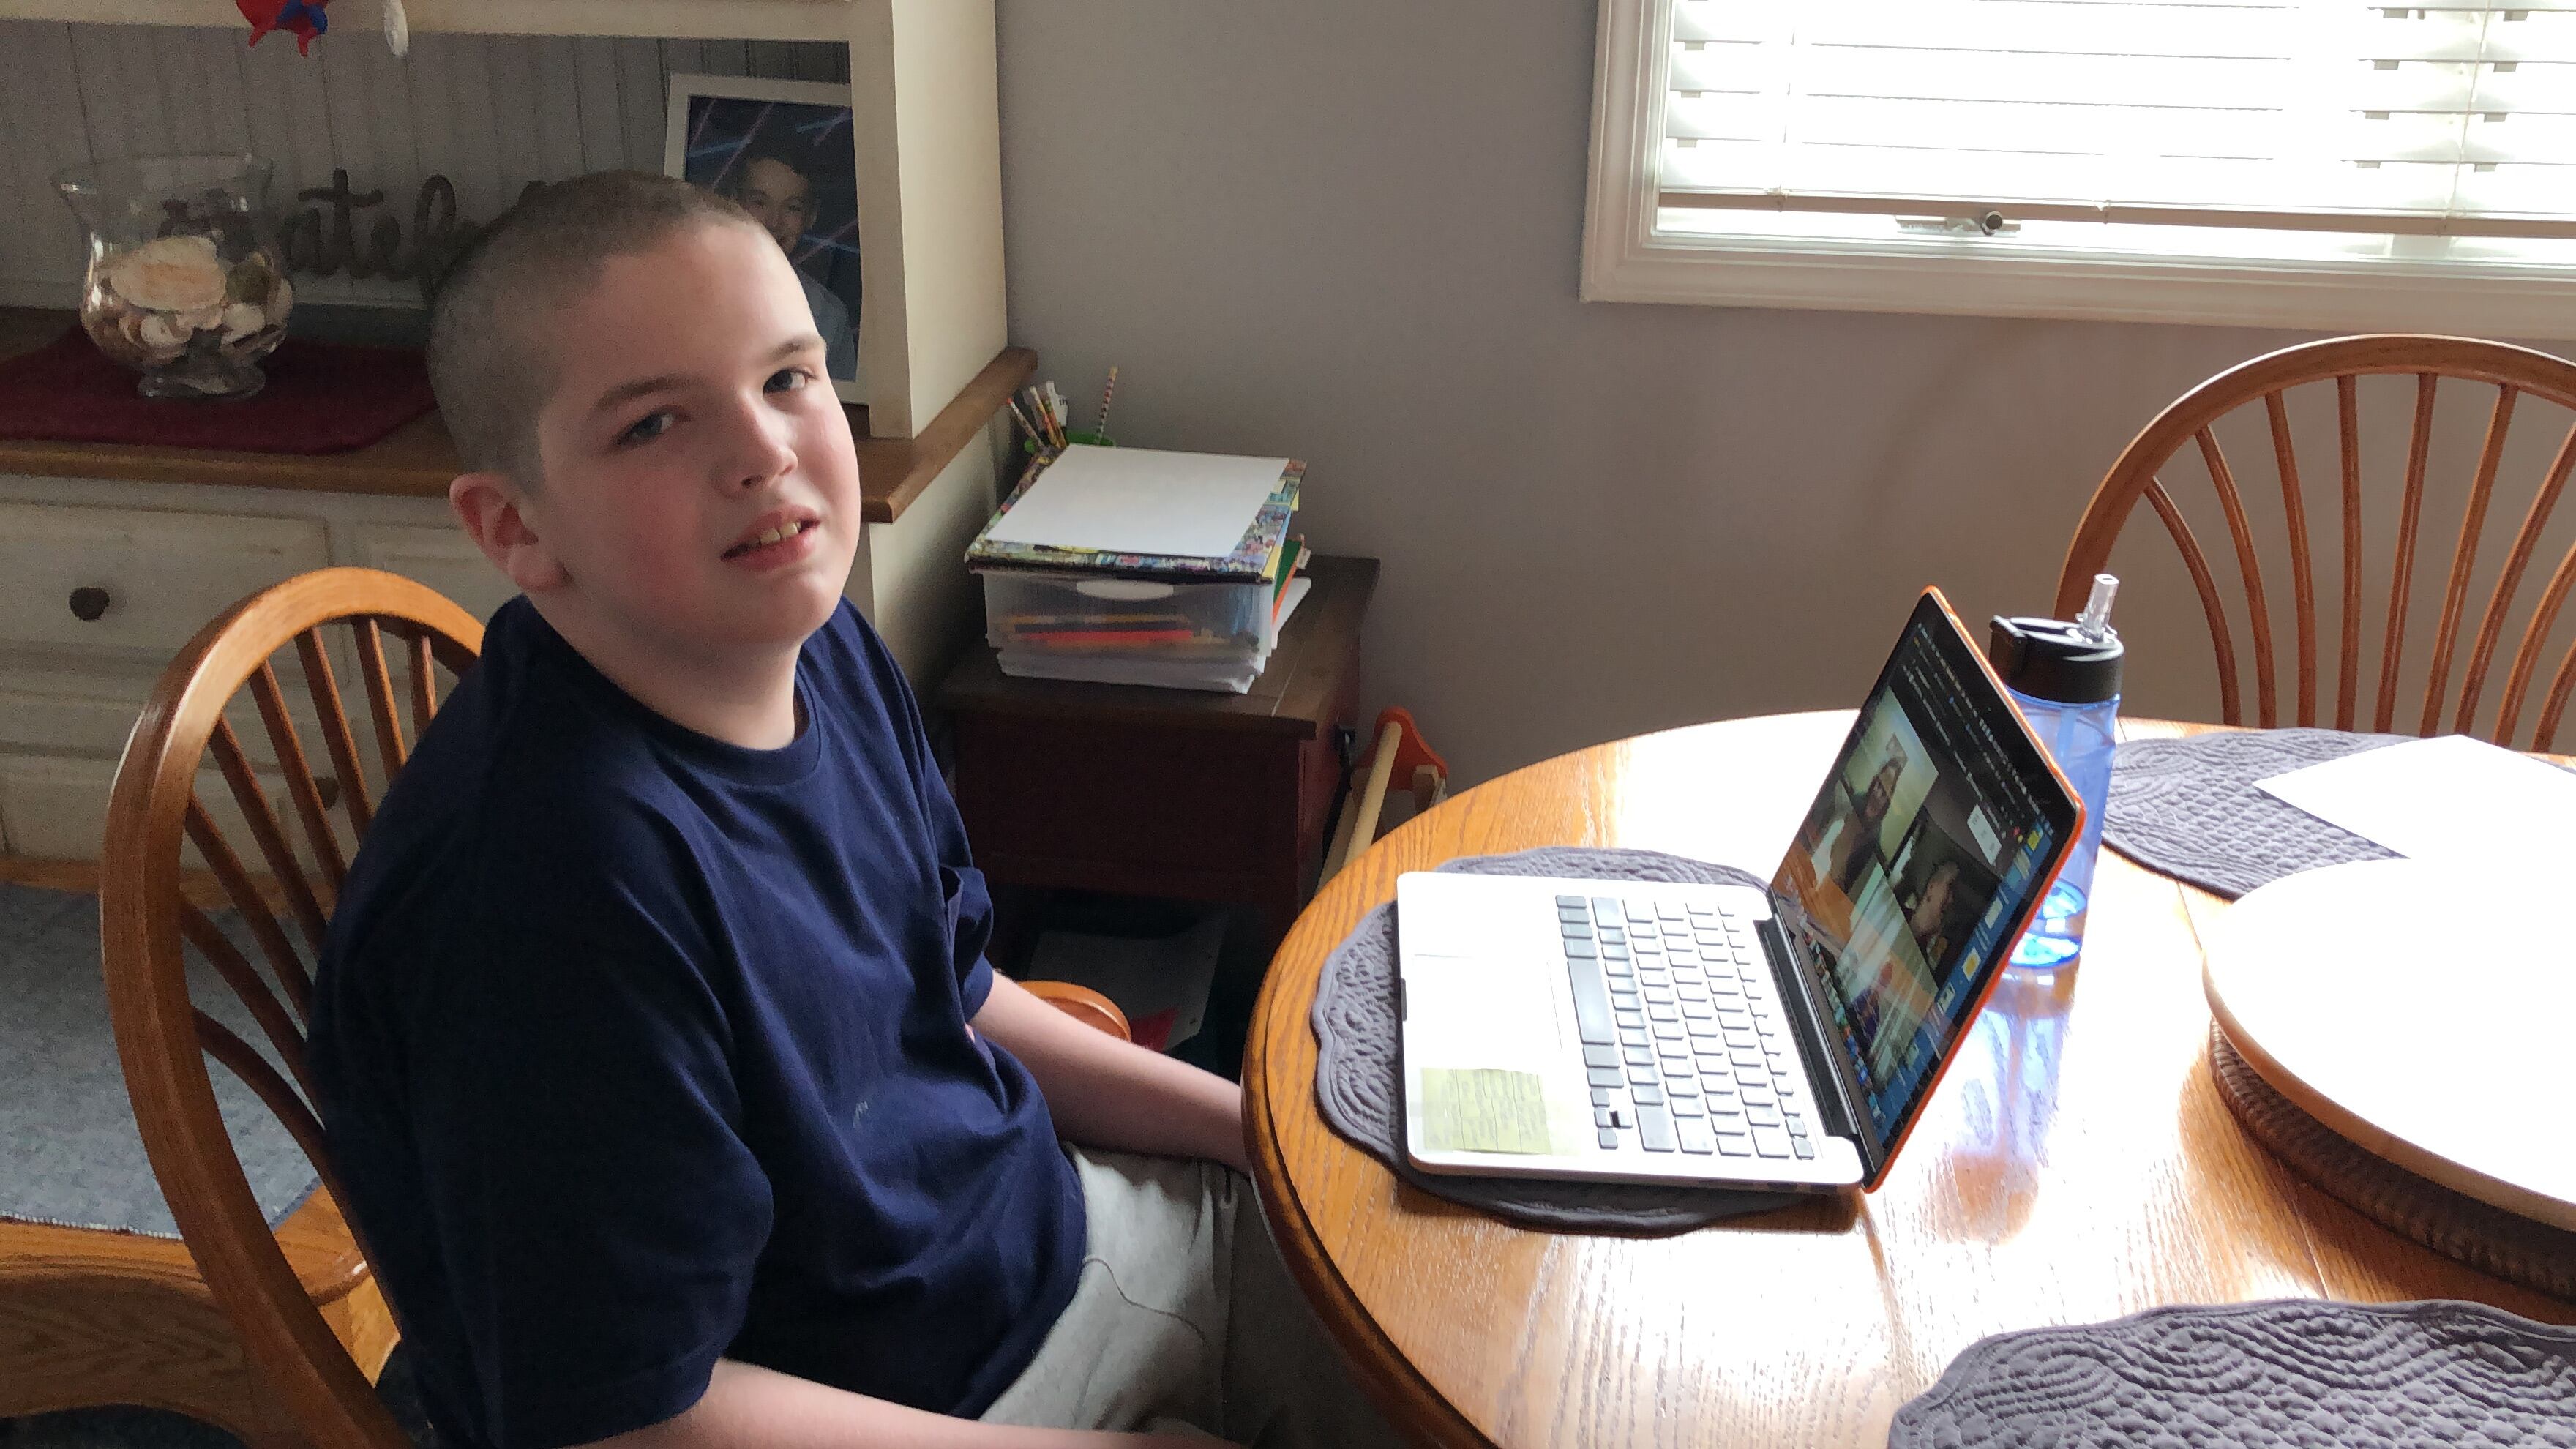 Kristen Collins’ son, Matty, sits at a kitchen table with a laptop.